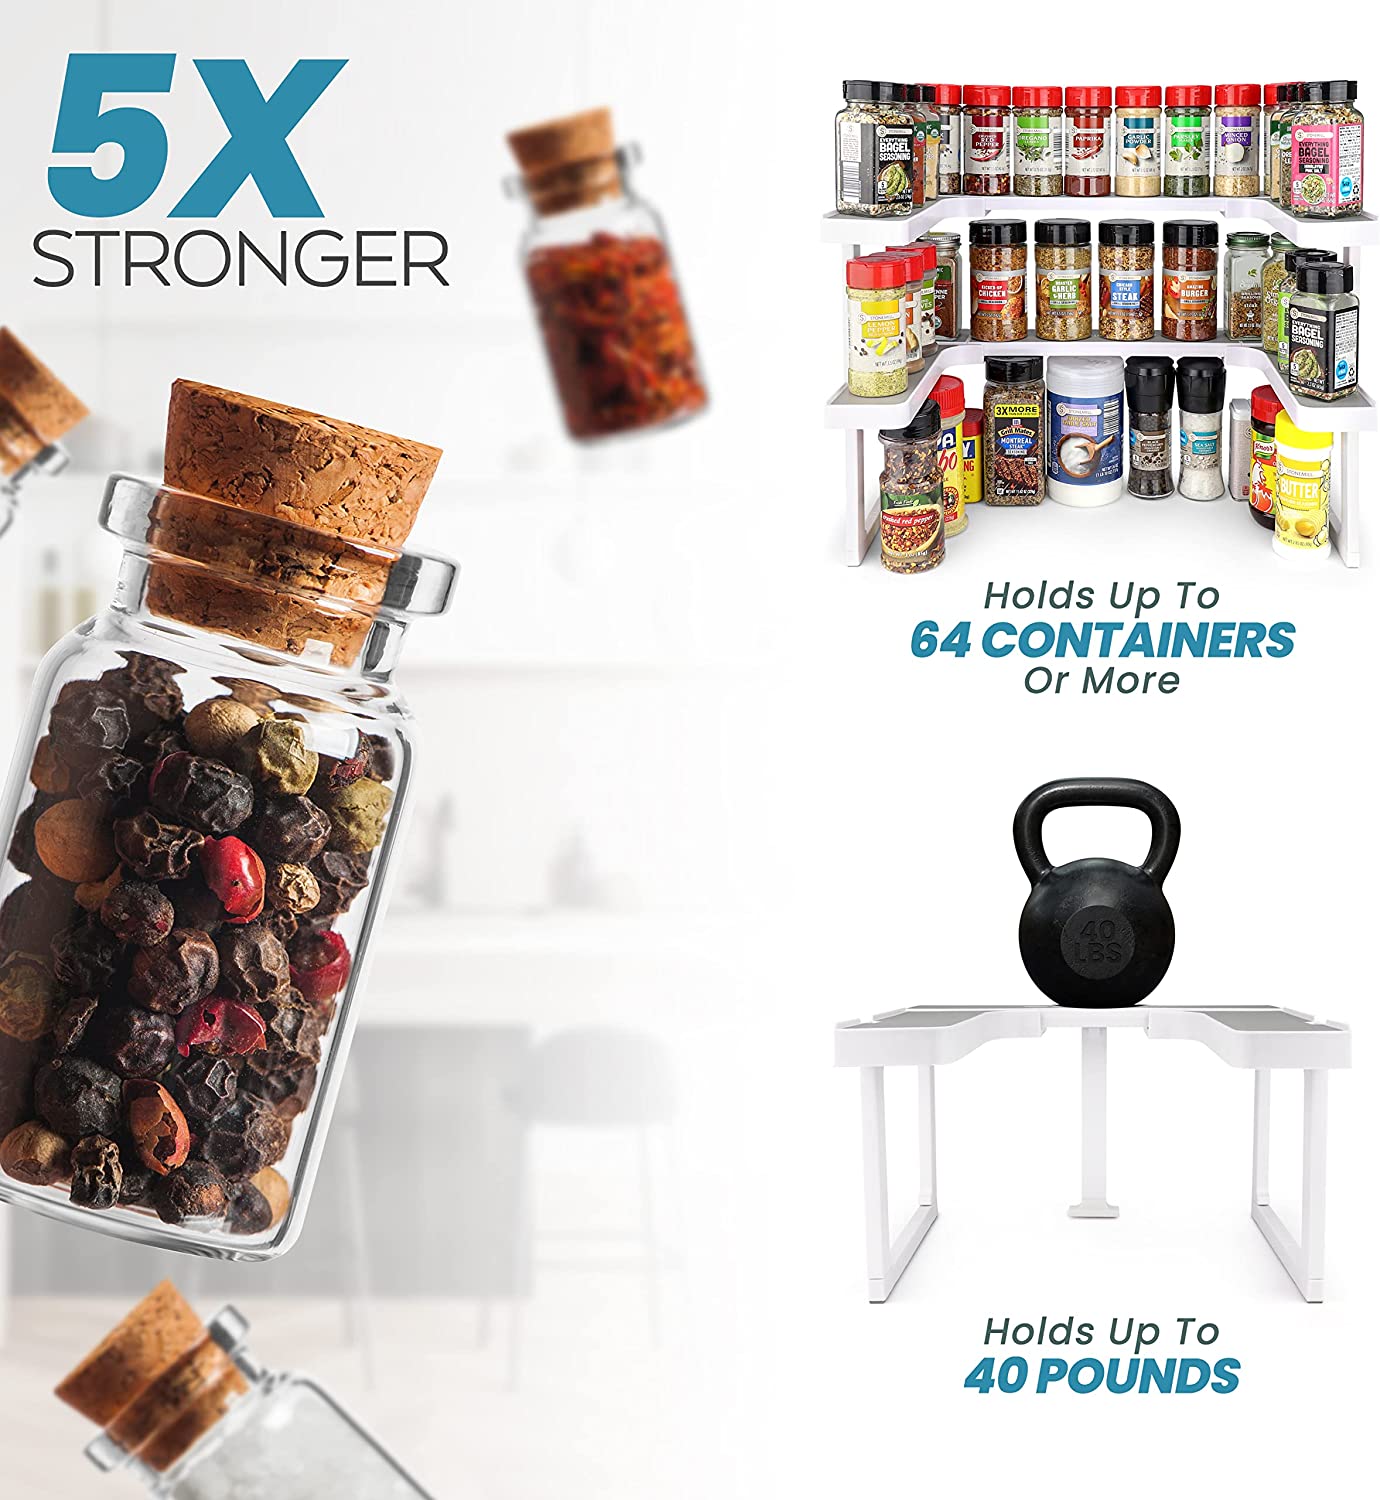 A collage of images showing an expandable spice rack. The text reads, '5 times stronger. Holds up to 64 containers or more. Holds up to 40 pounds.'